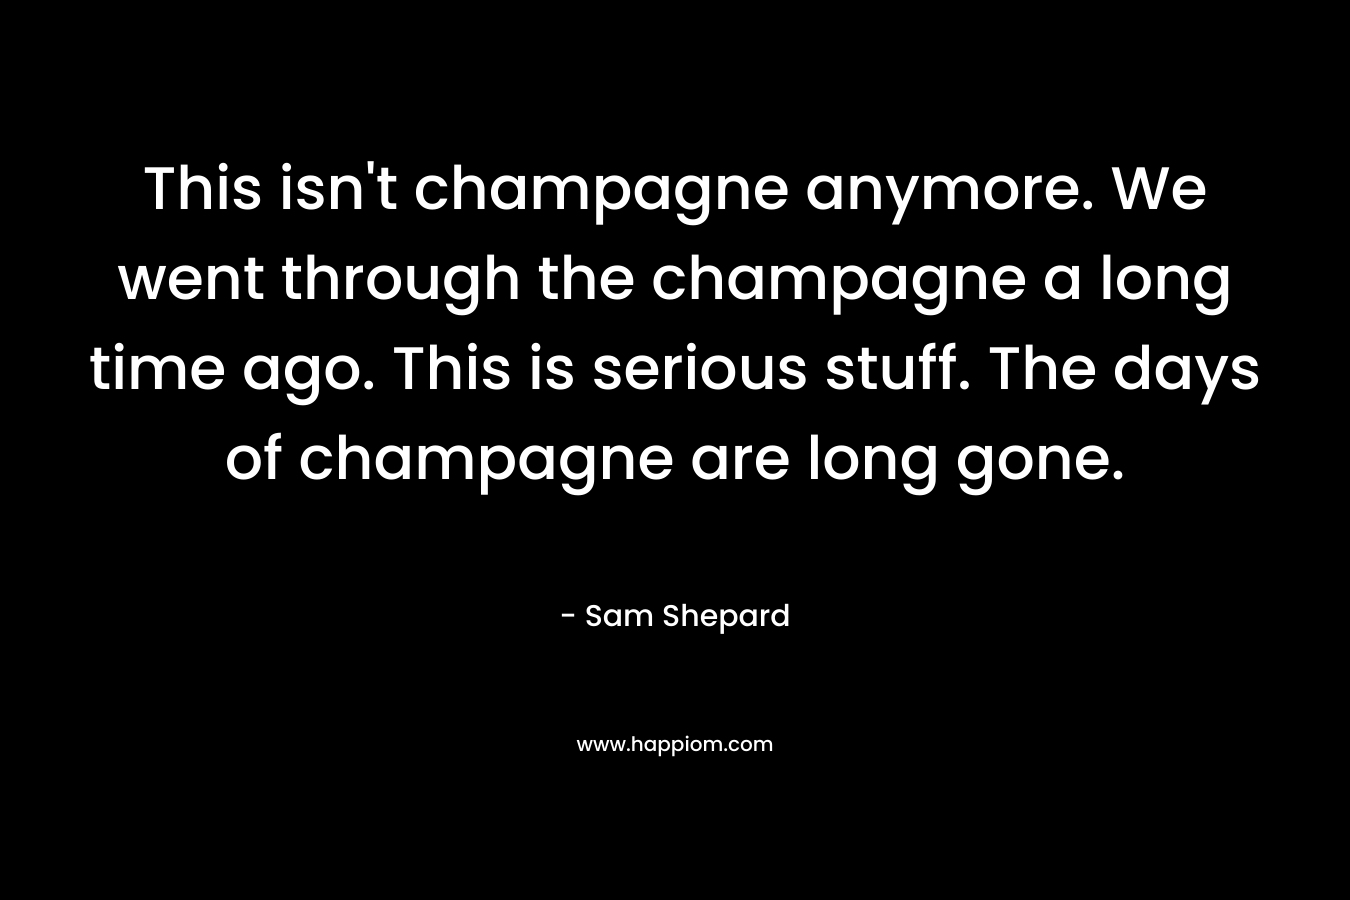 This isn’t champagne anymore. We went through the champagne a long time ago. This is serious stuff. The days of champagne are long gone. – Sam Shepard